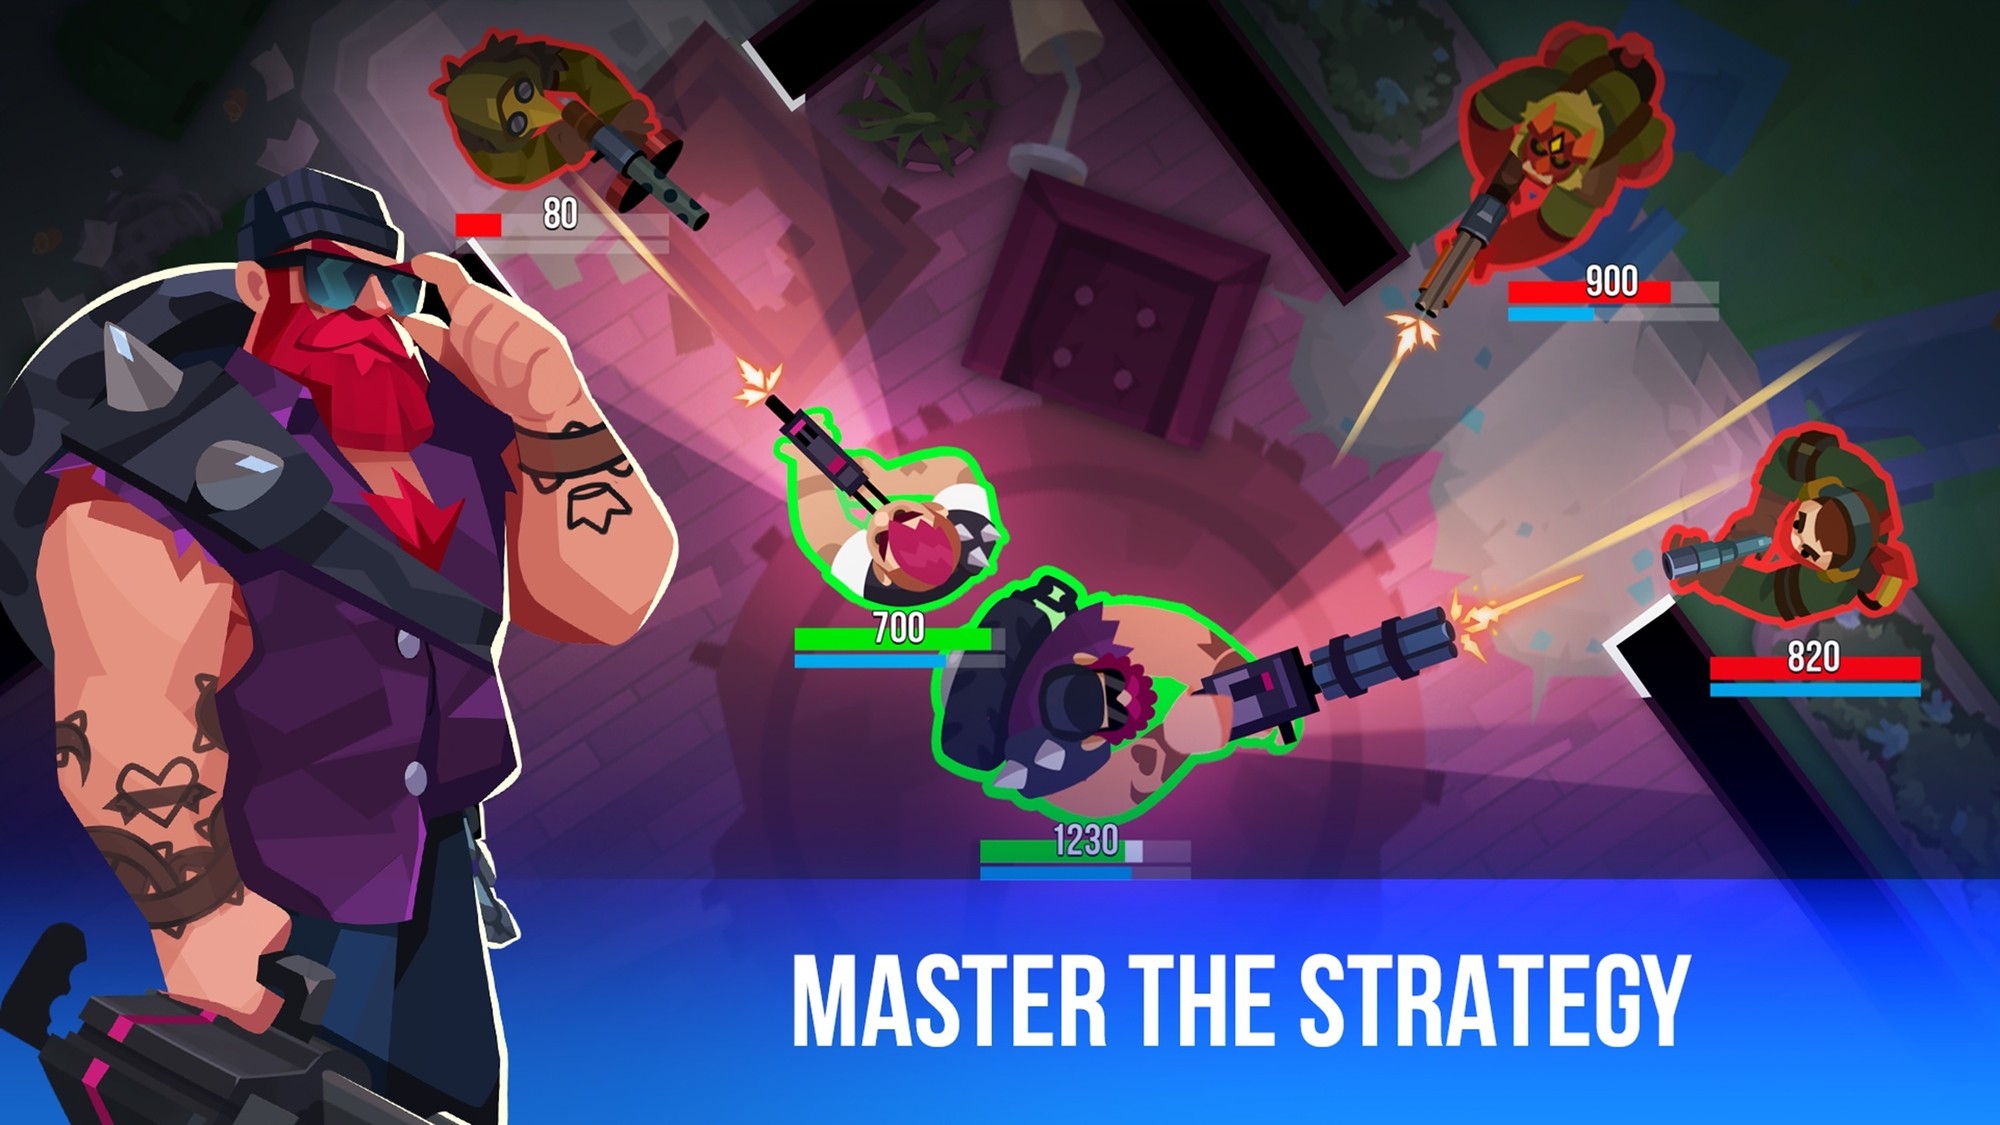 mater one strategy and you'll win in bullet echo mod apk